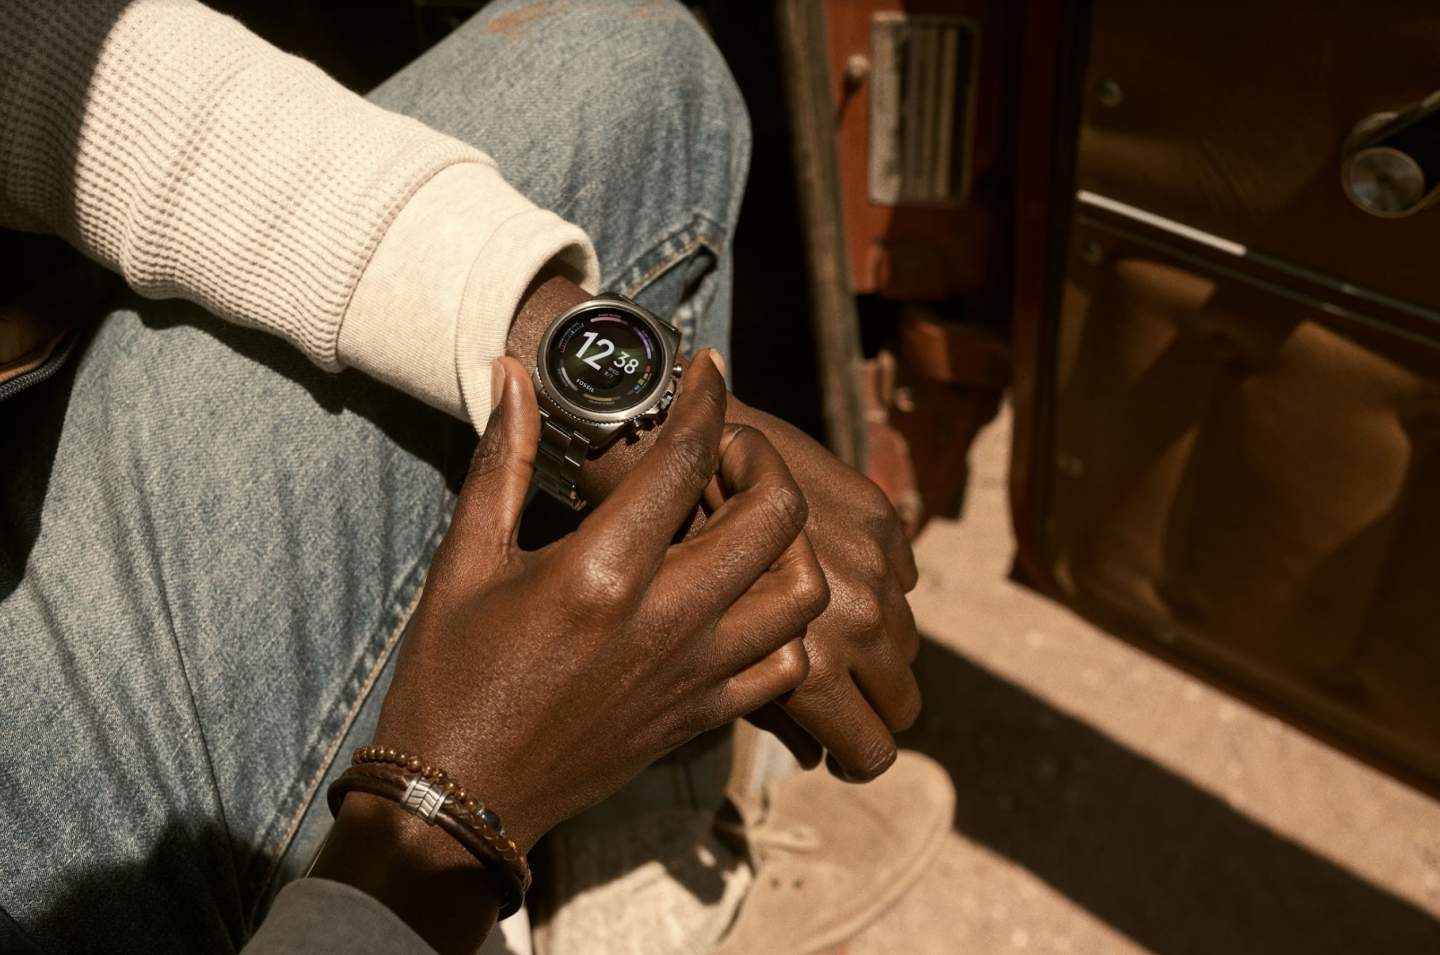 Fossil Gen 6: the first smartwatch with Snapdragon Wear 4100+ processor, but without Wear OS 3 like the Samsung Galaxy Watch 4